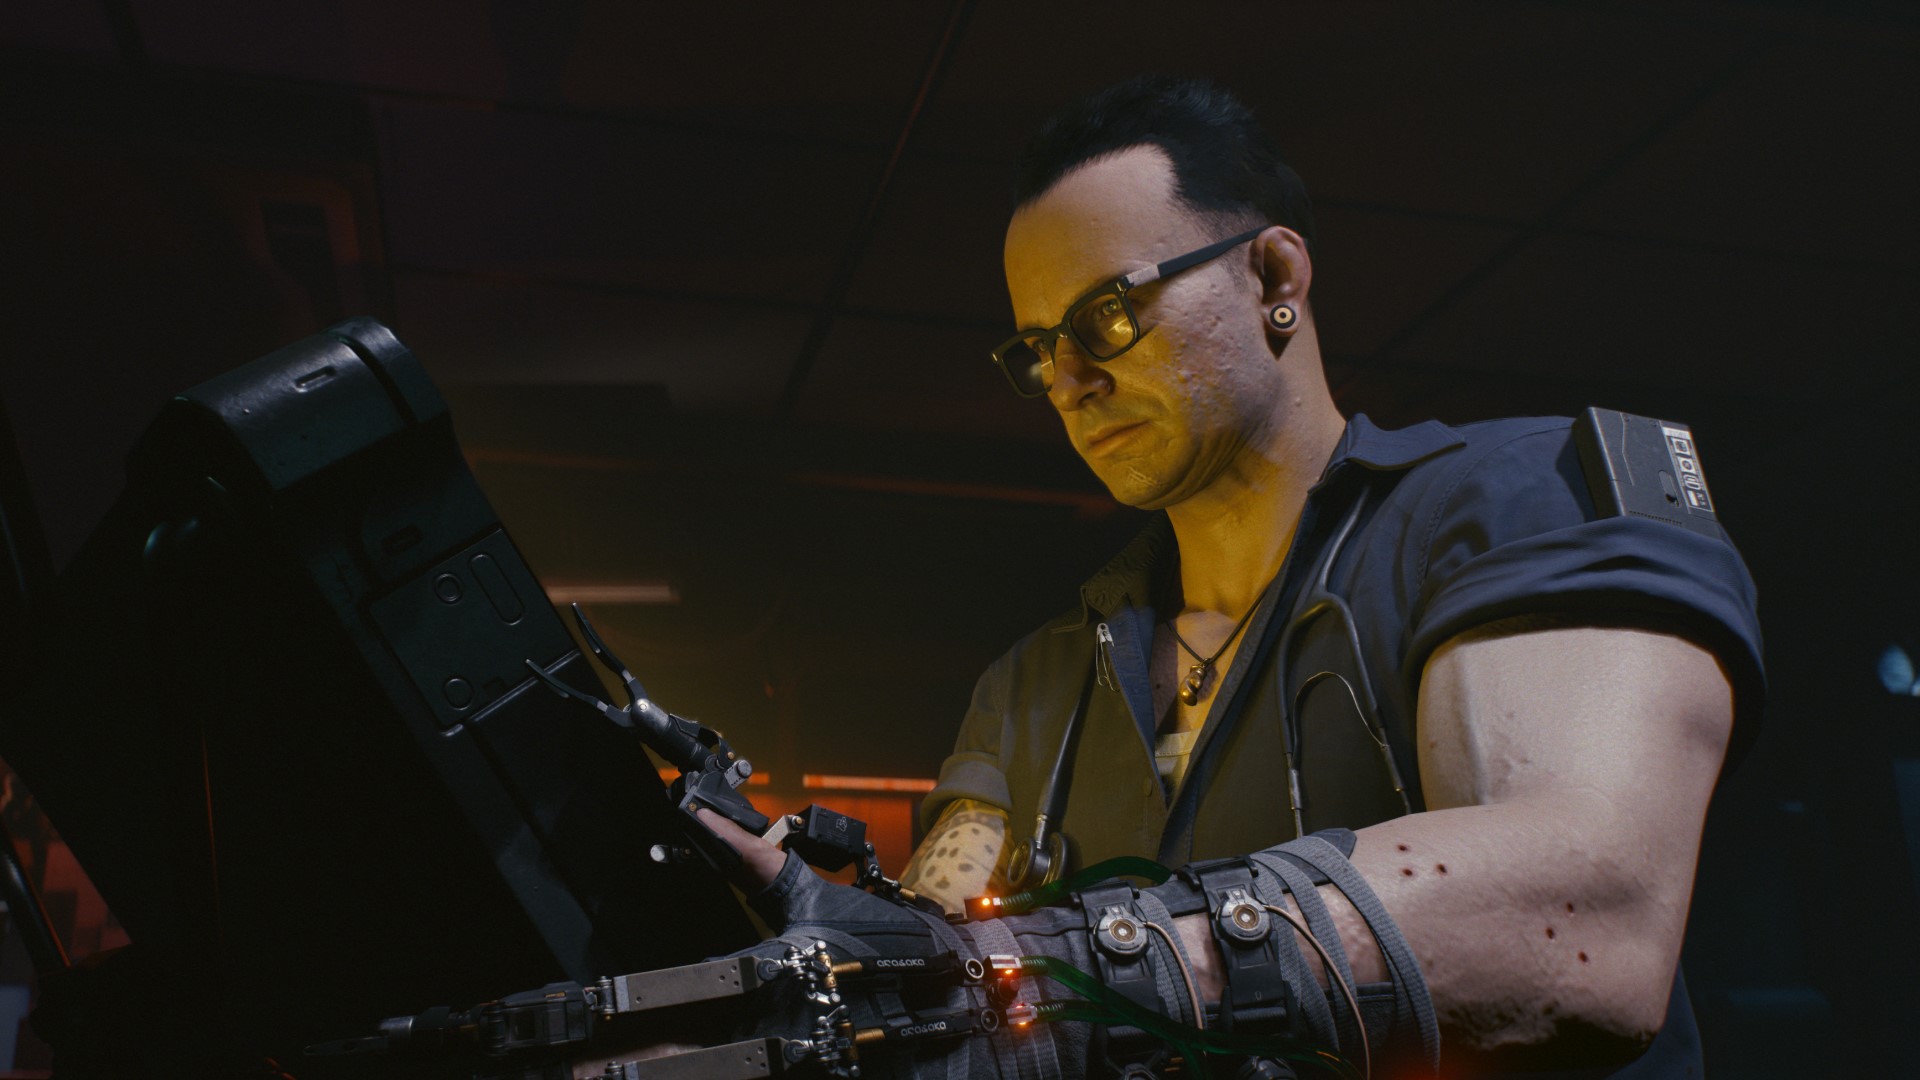 Cyberpunk 2077 Steam reviews for the past month are 90% positive